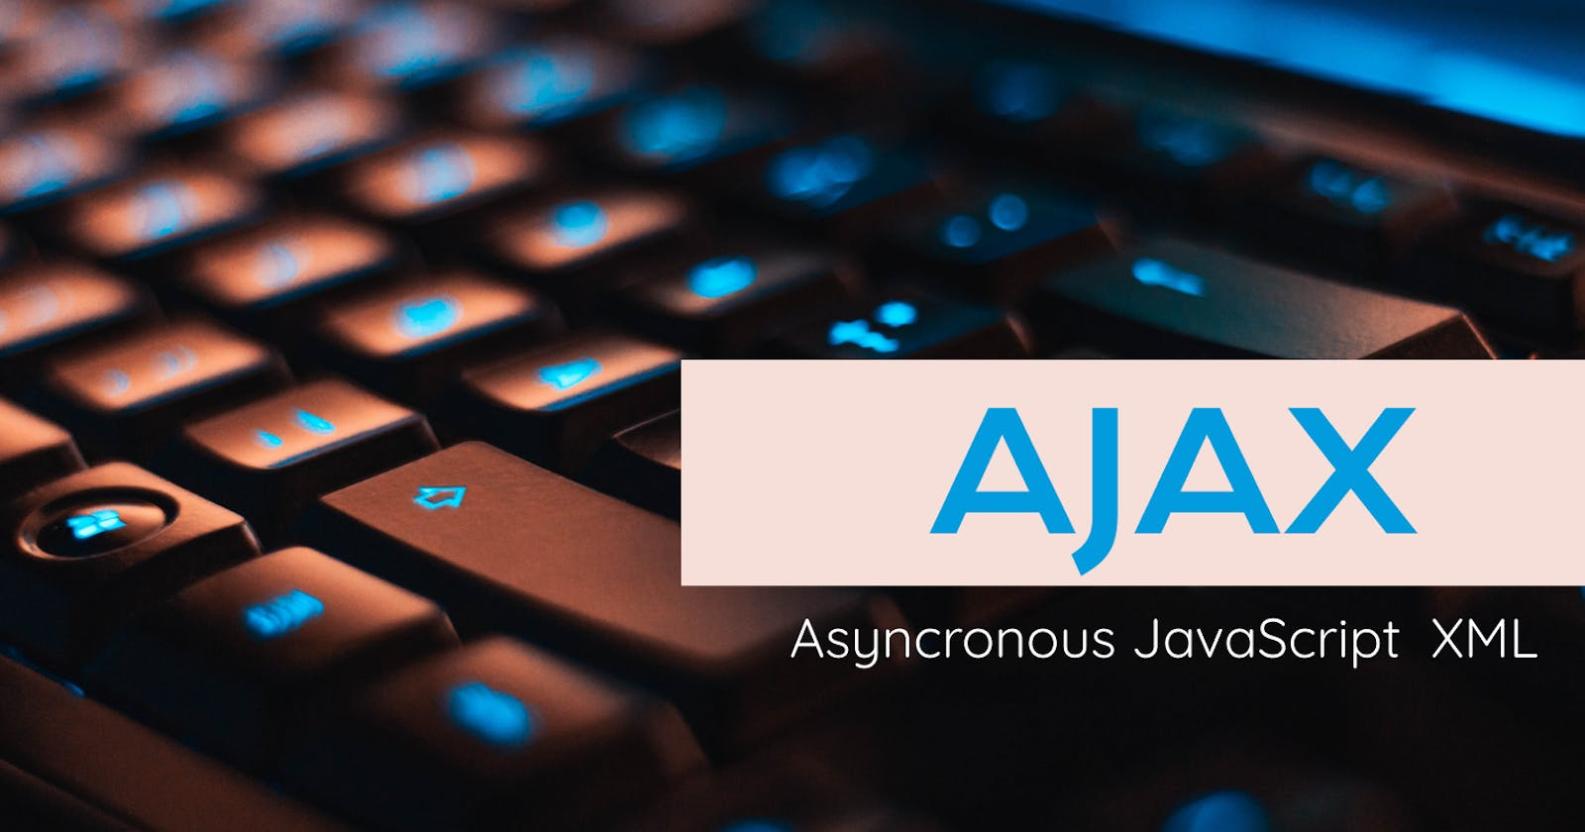 How Can JavaScript AJAX Help Me Create Dynamic and Interactive Web Applications?